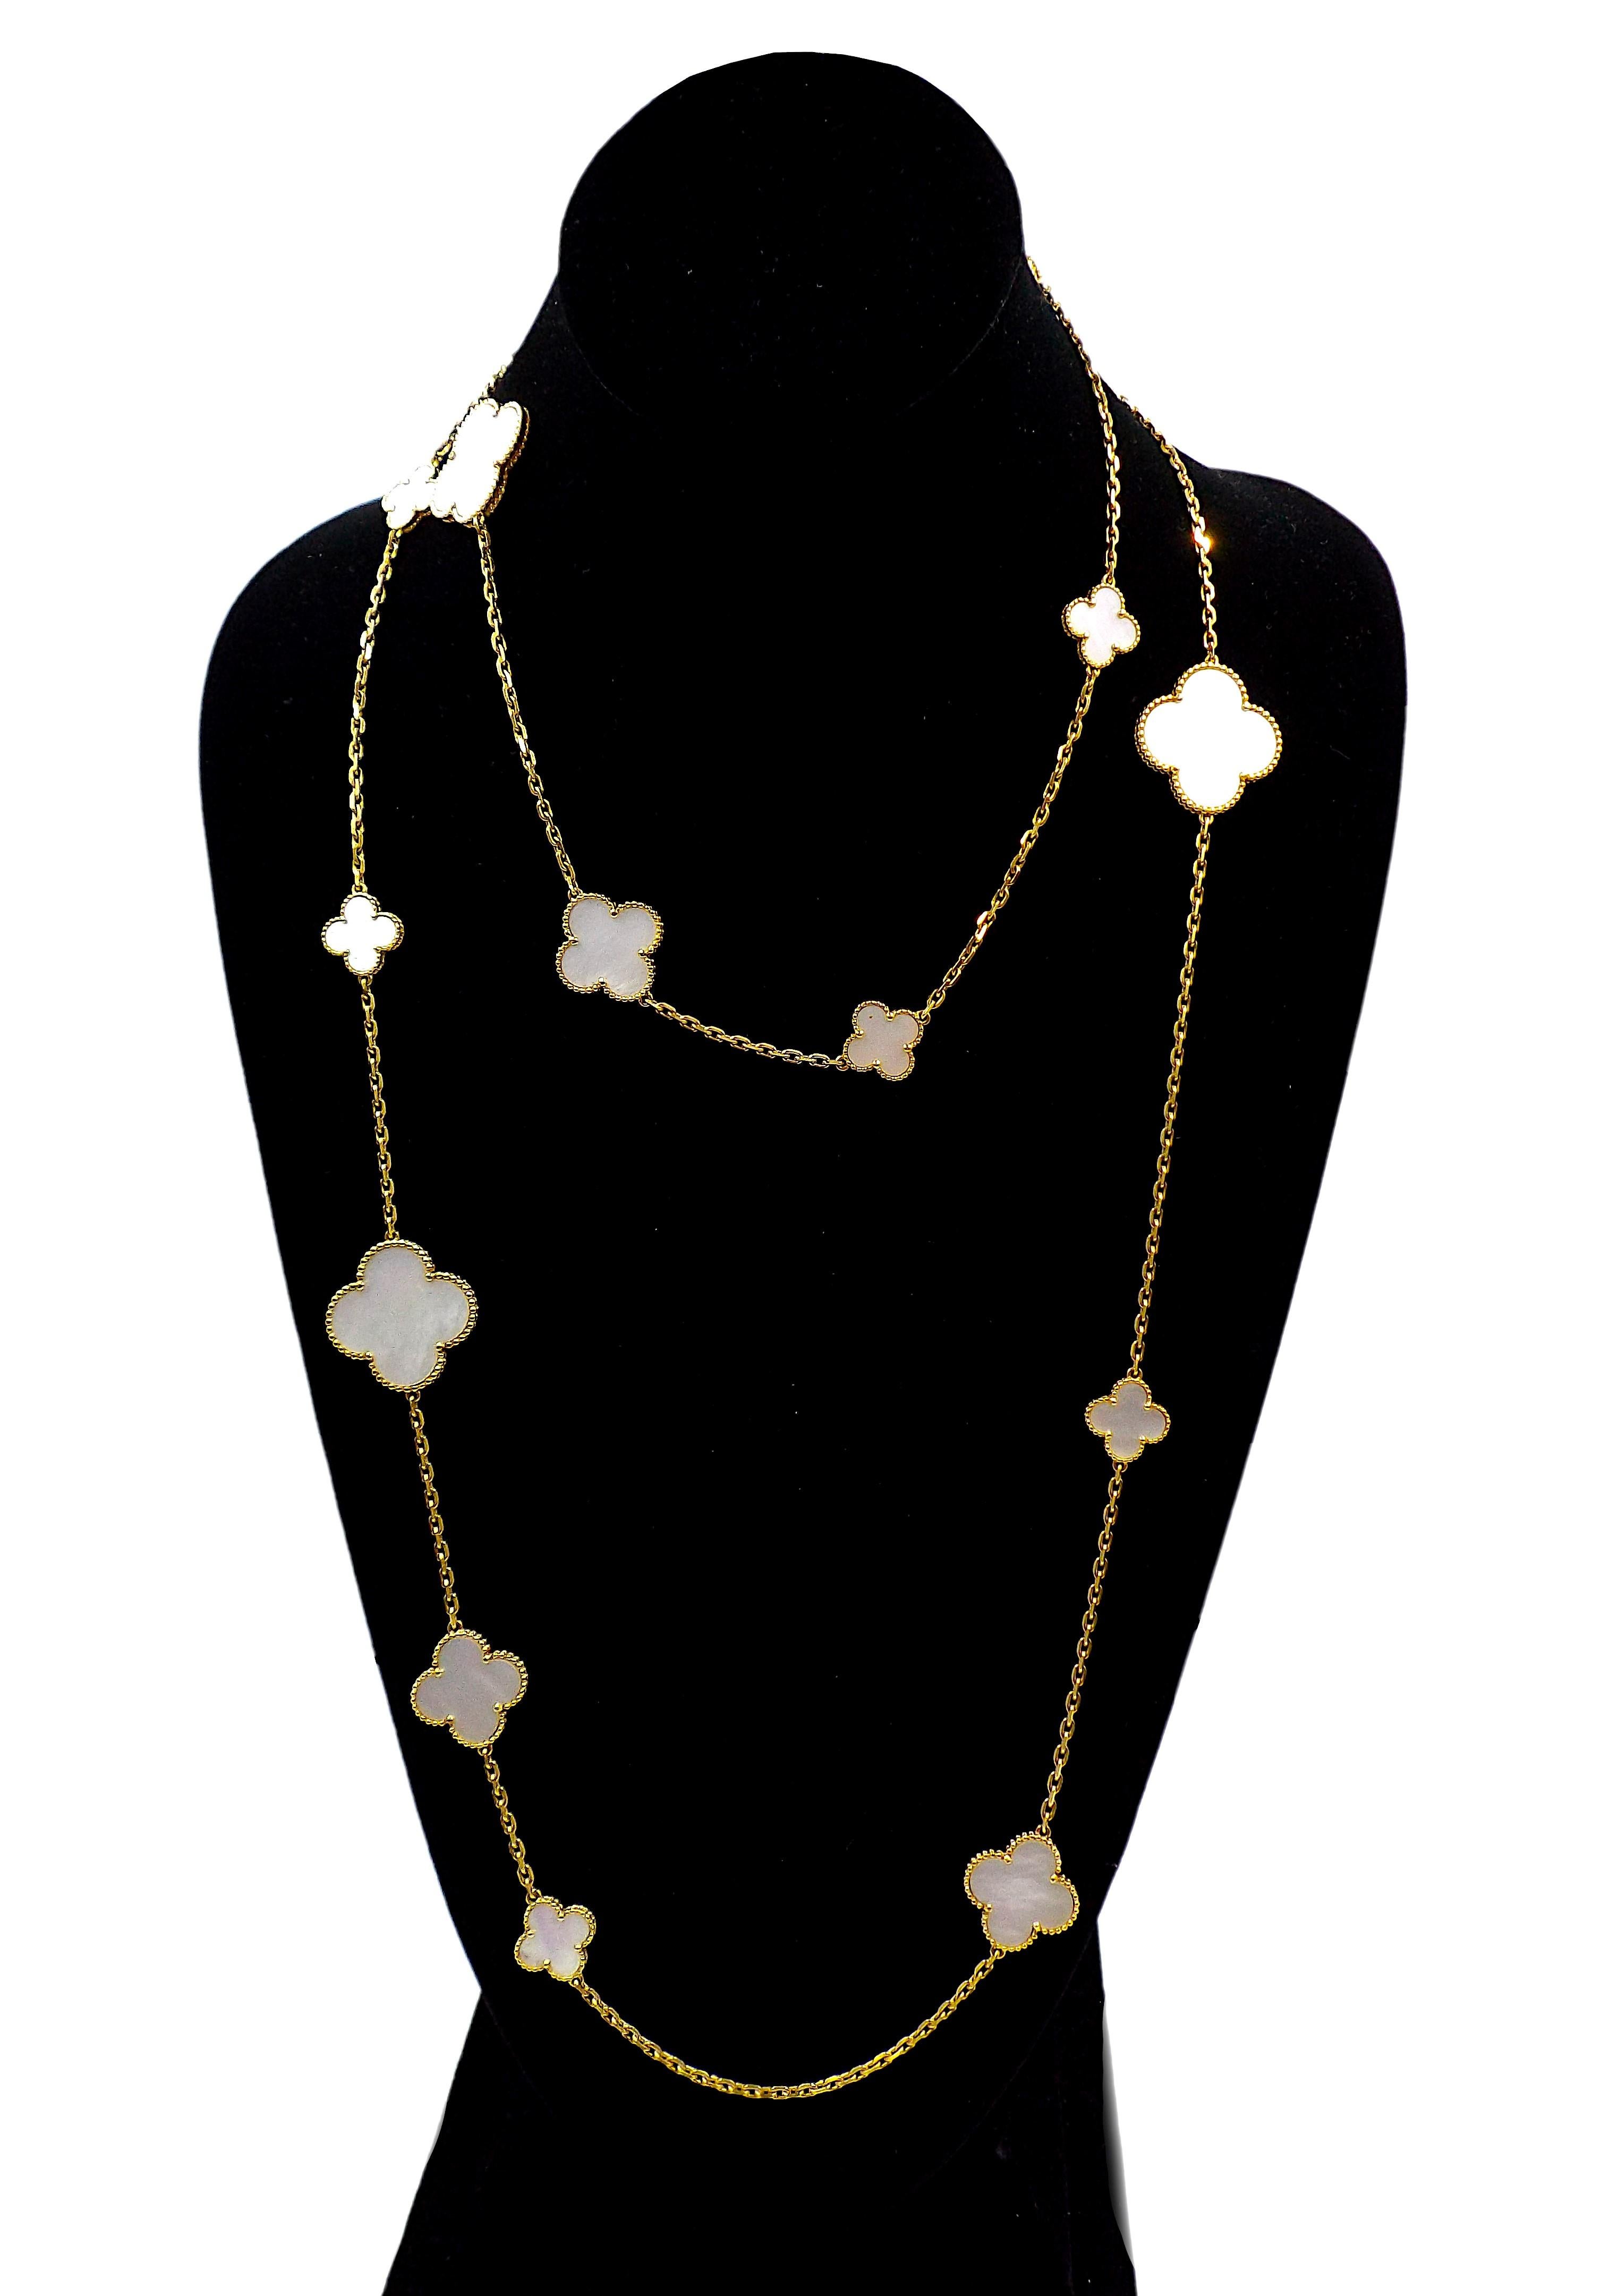 Magic Alhambra long necklace, 16 motifs, 18K yellow gold, white mother-of-pearl. Chain length is 120 cm. Signed, numbered, stamped 750.